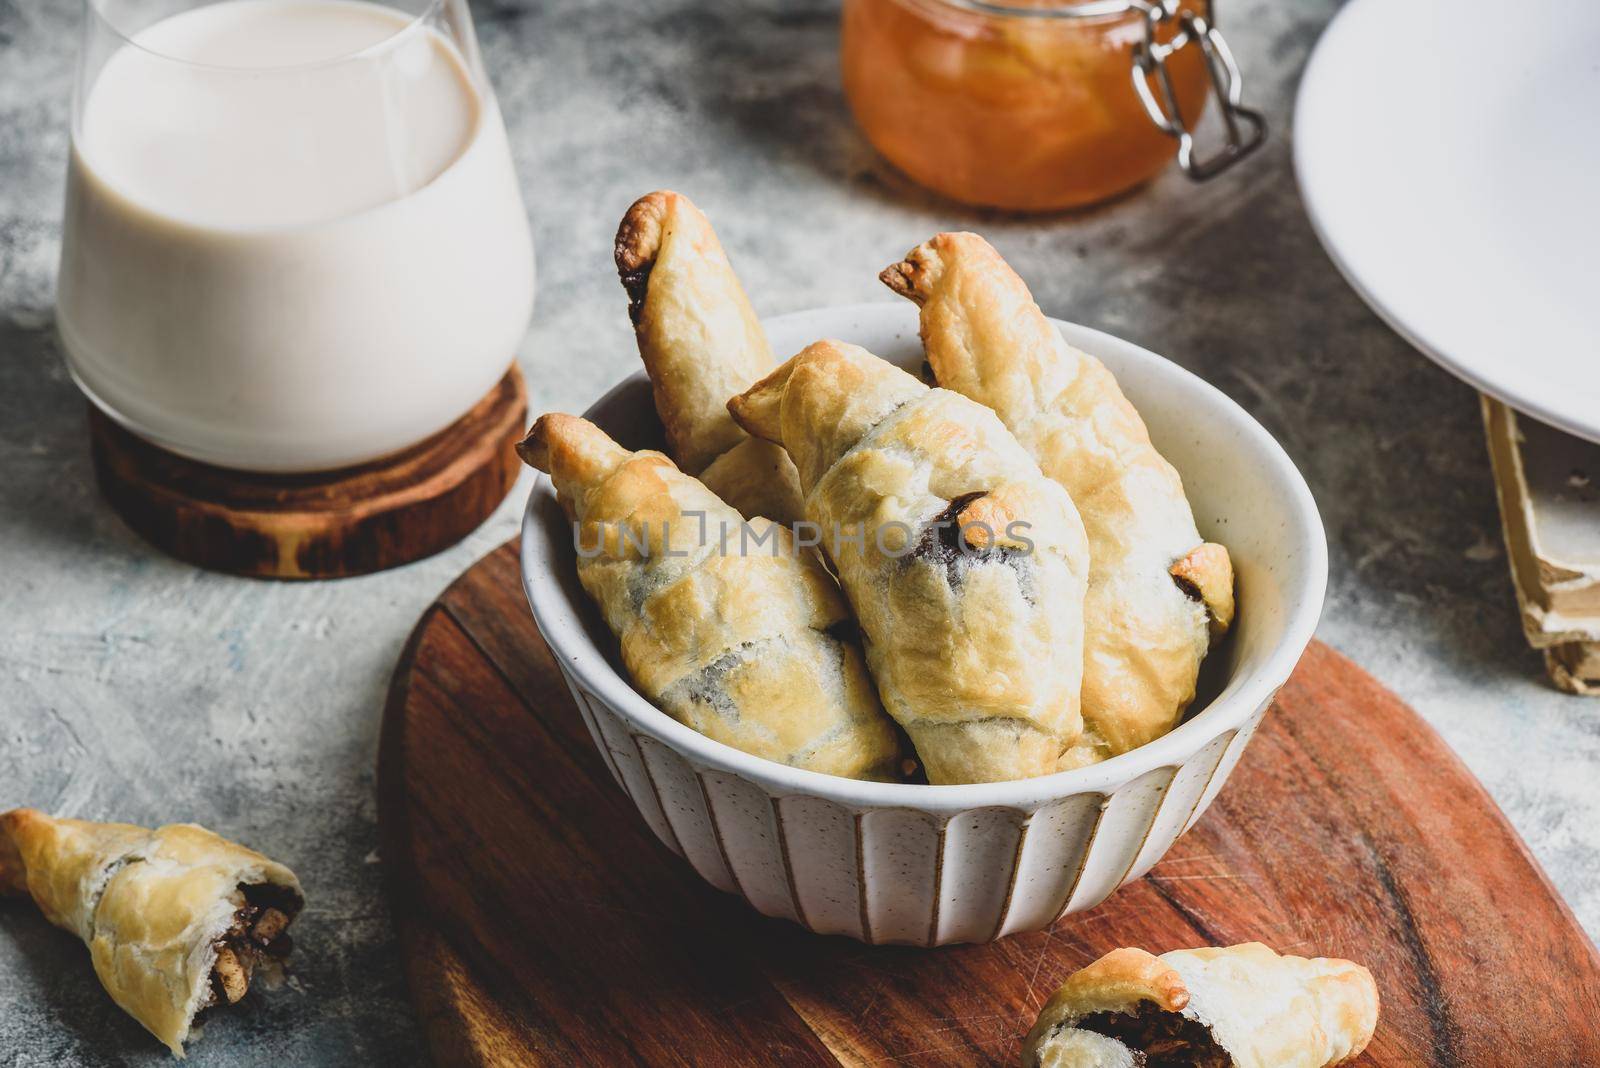 Bowl of fresh baked croissants stuffed with nuts and chocolate spread